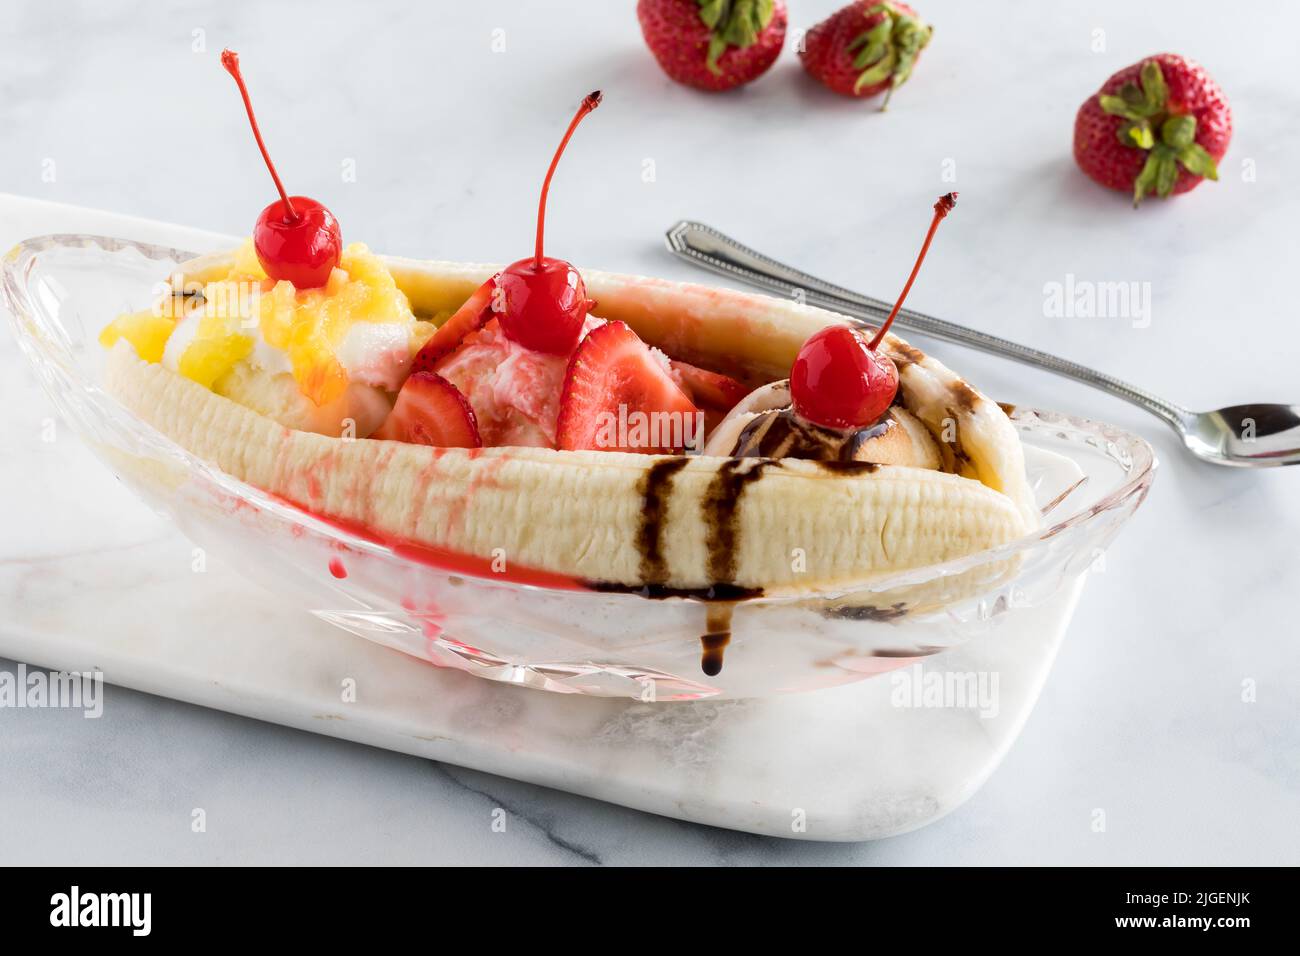 Delicious banana split with chocolate sauce dripping down the side. Stock Photo